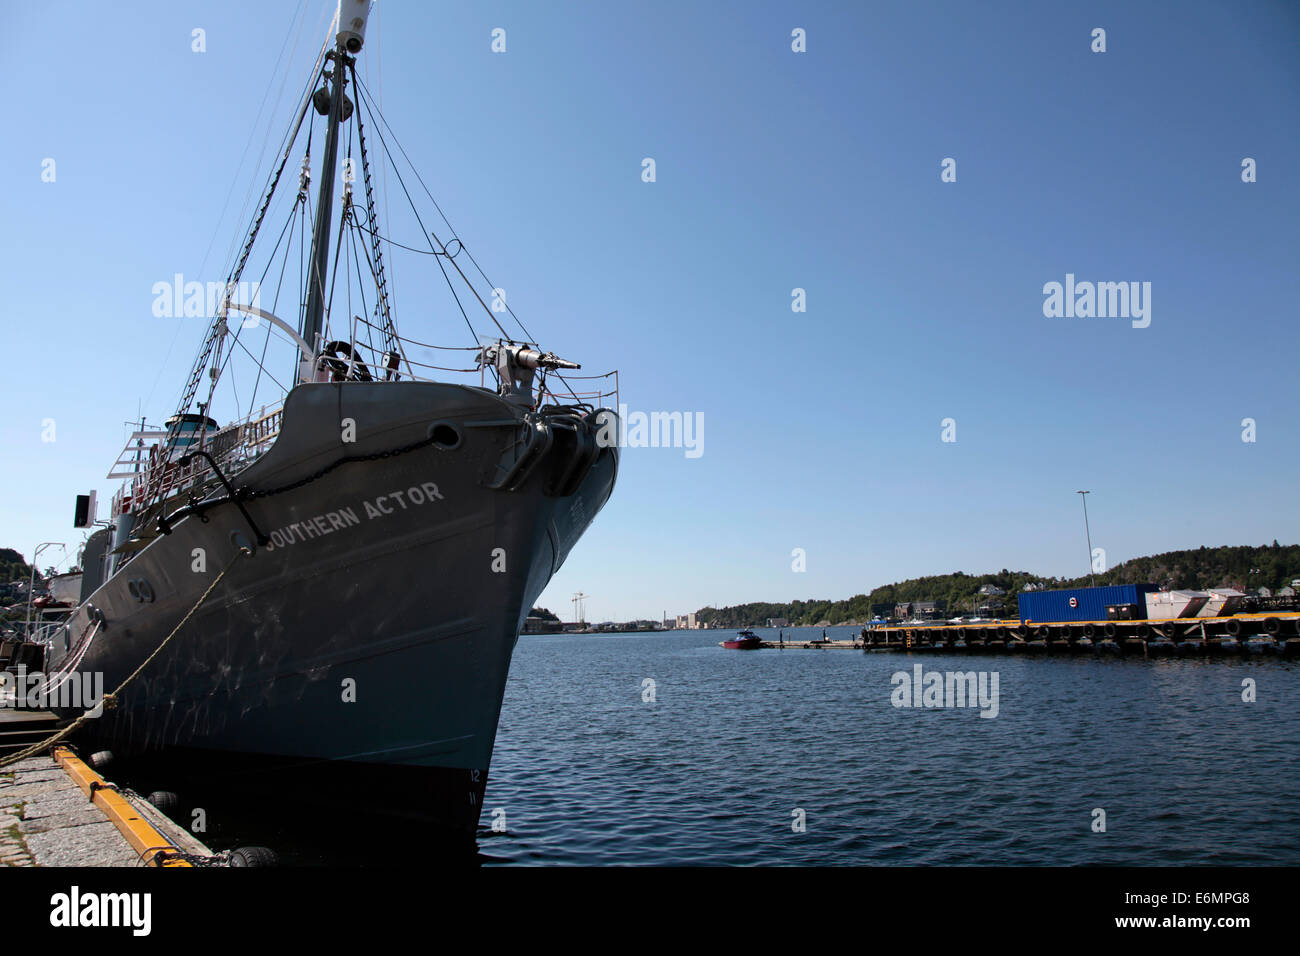 Harpune on the whaling ship Southern Actor. Today it is a museum ship. Untill 1968 Sandefjord was the center of whaling in Norway. The whaling brought prosperity. Photo: Klaus Nowottnick Date: June 7, 2014 Stock Photo